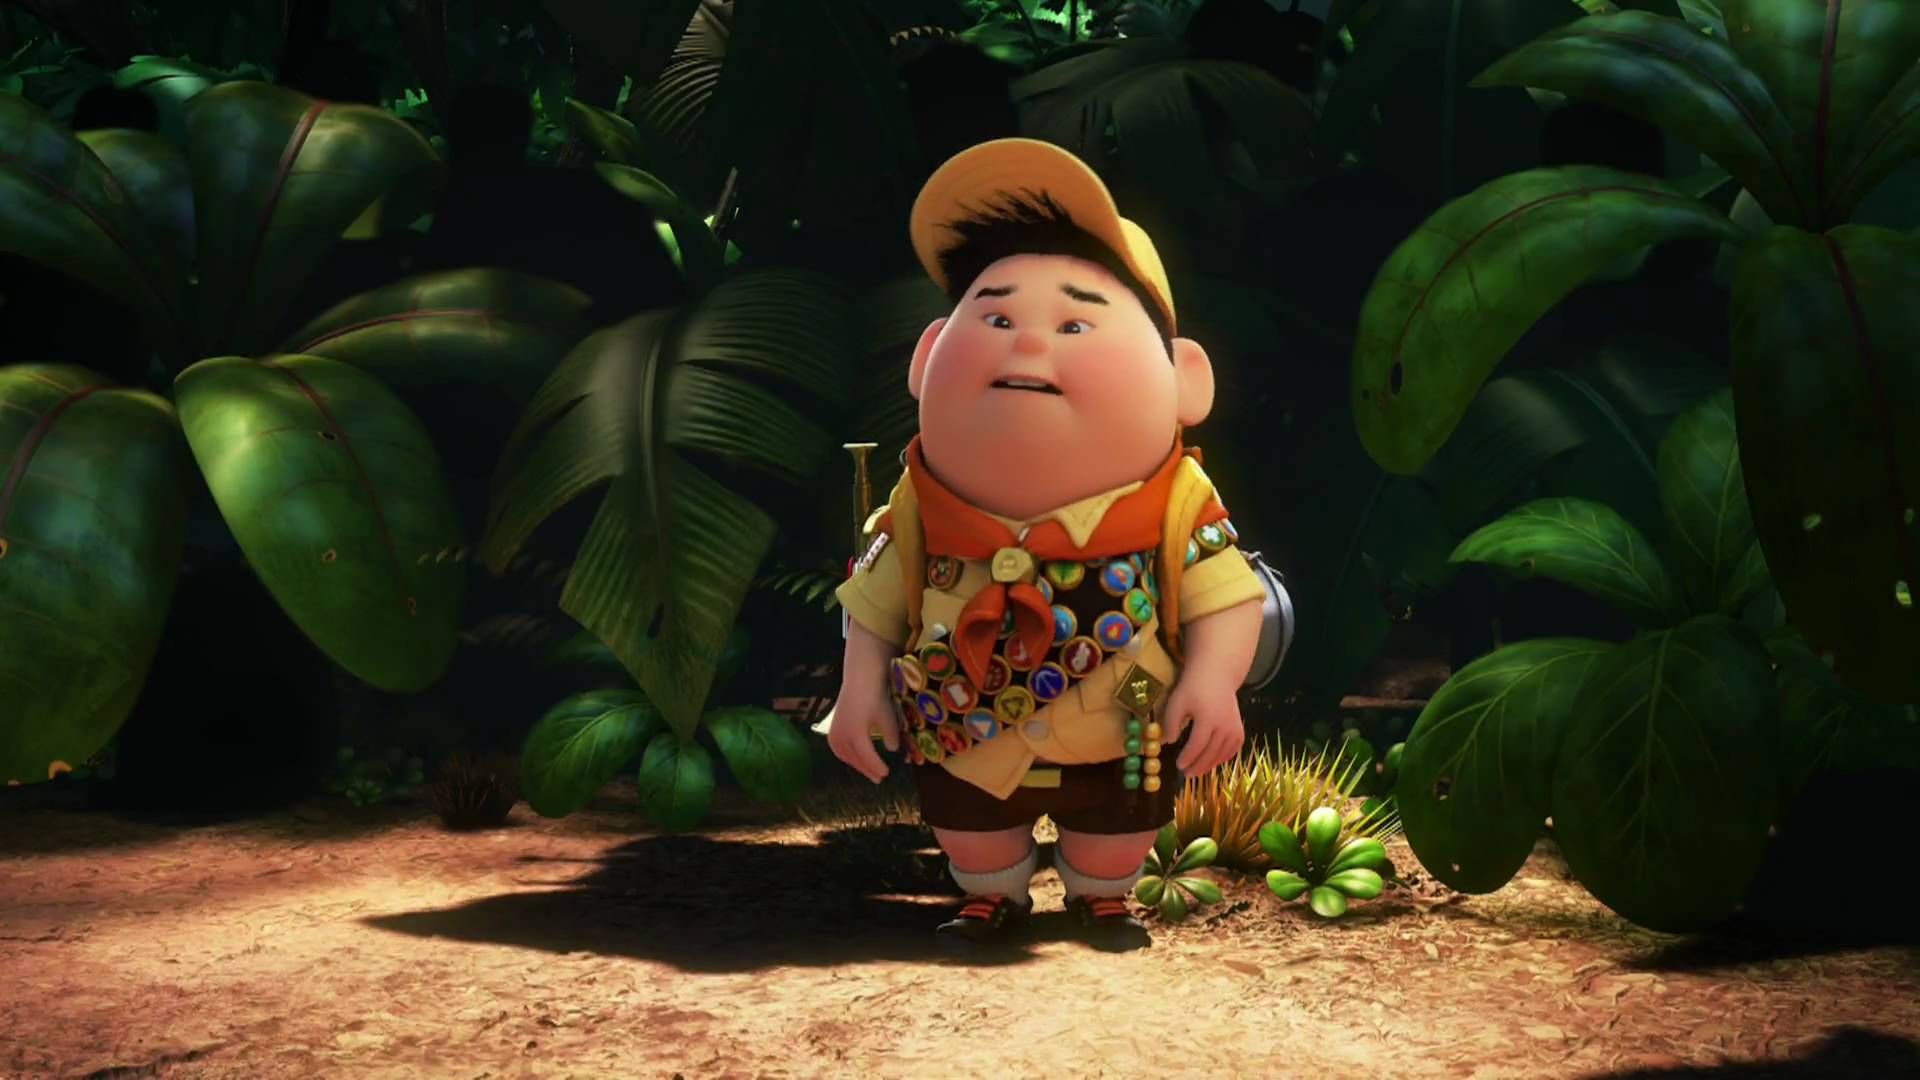 Russell (Up) HD wallpapers free download | Wallpaperbetter